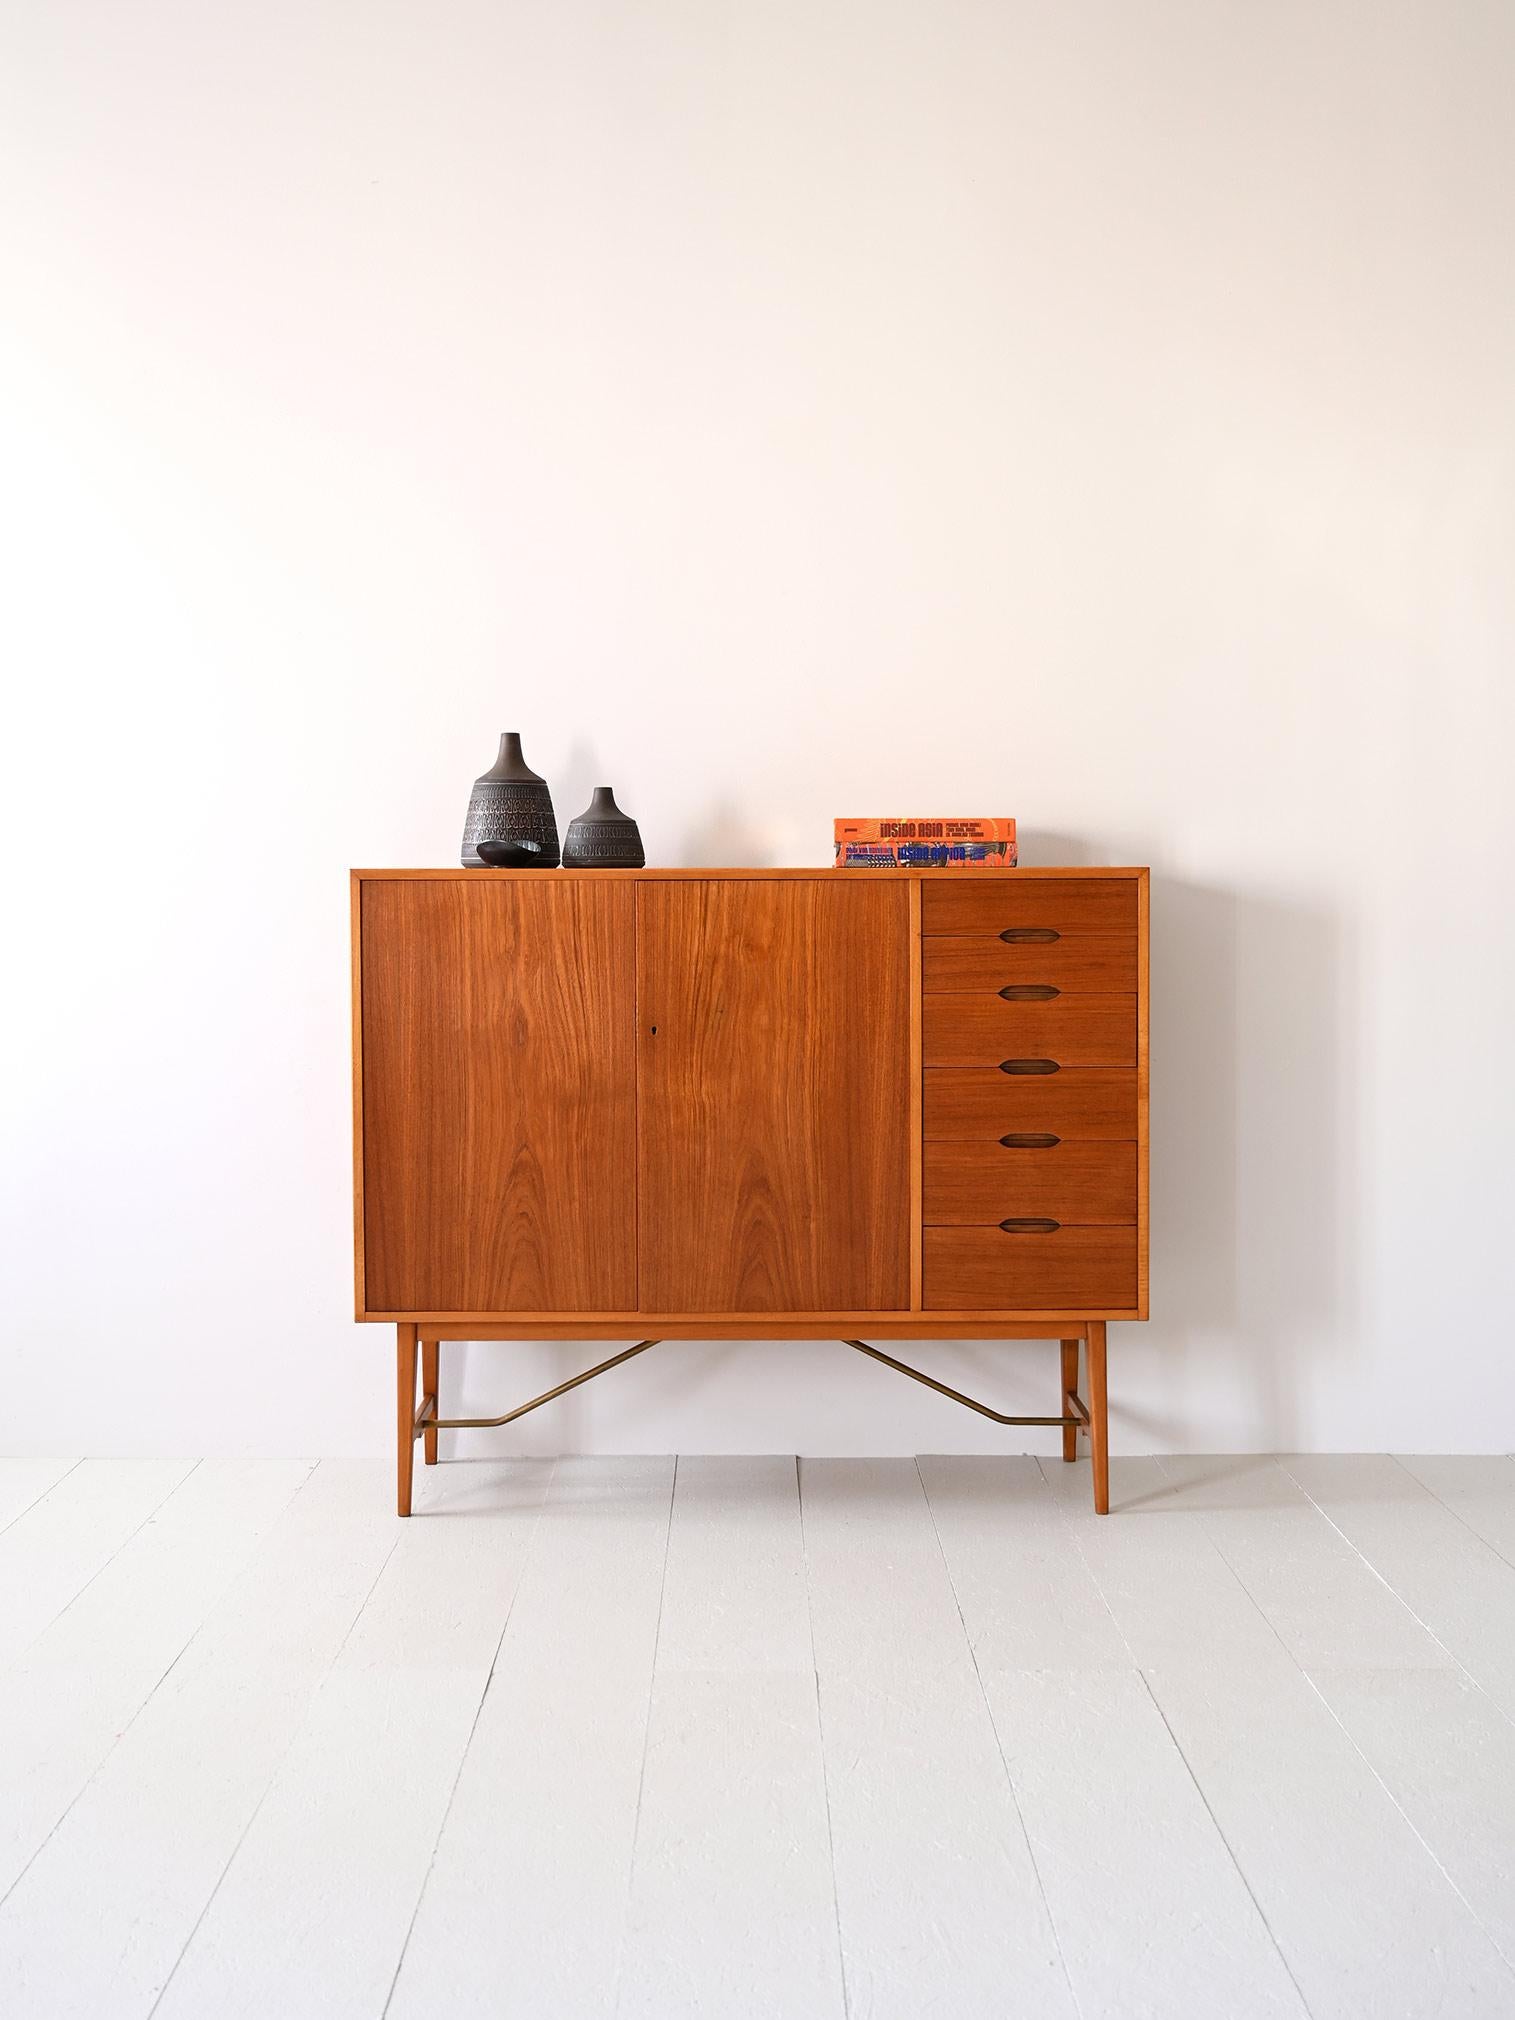 Simple, clean forms for this mid-century vintage Scandinavian teak wood sideboard/highboard.

Marked wood grain and classically Scandinavian shaped legs characterize this capacious sideboard.

The highlight is its height of 115 cm and shallow depth